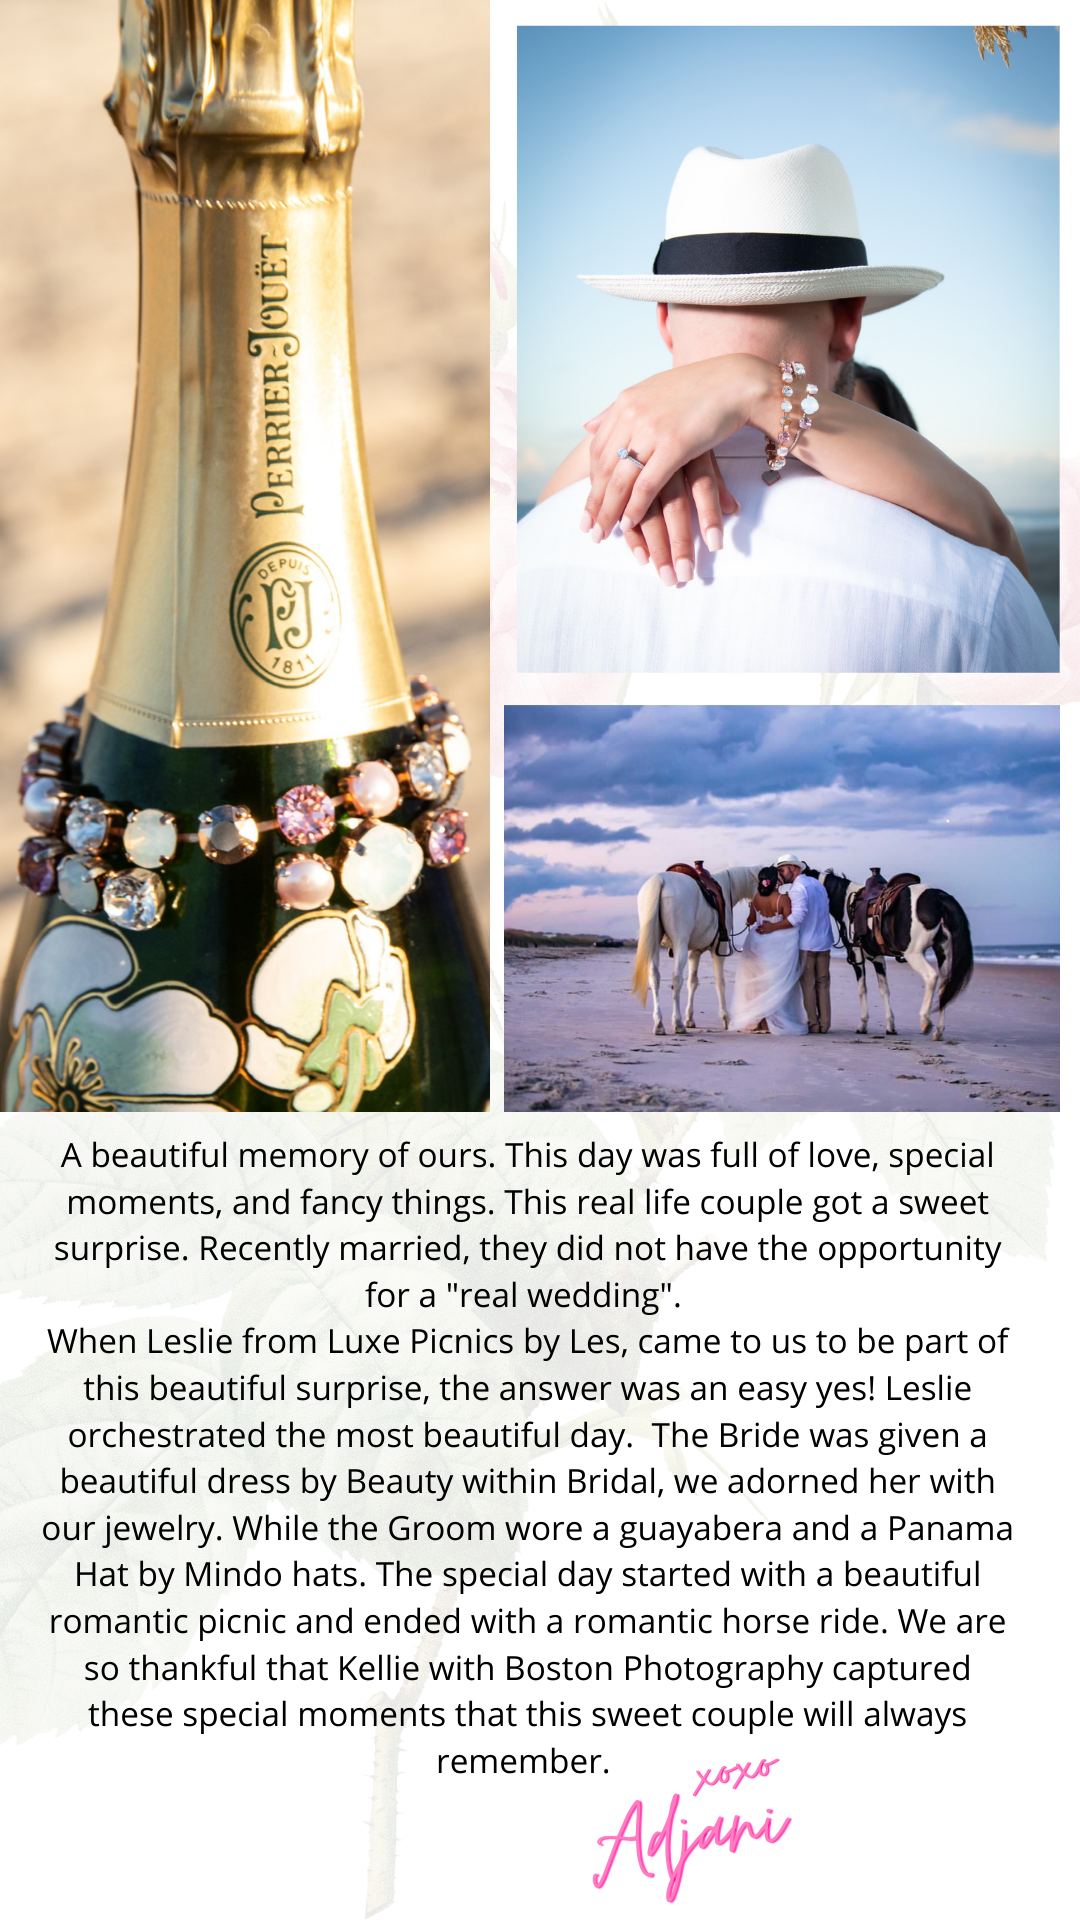 the most beautiful and romantic day! Stunning jewelry and fancy champagne!